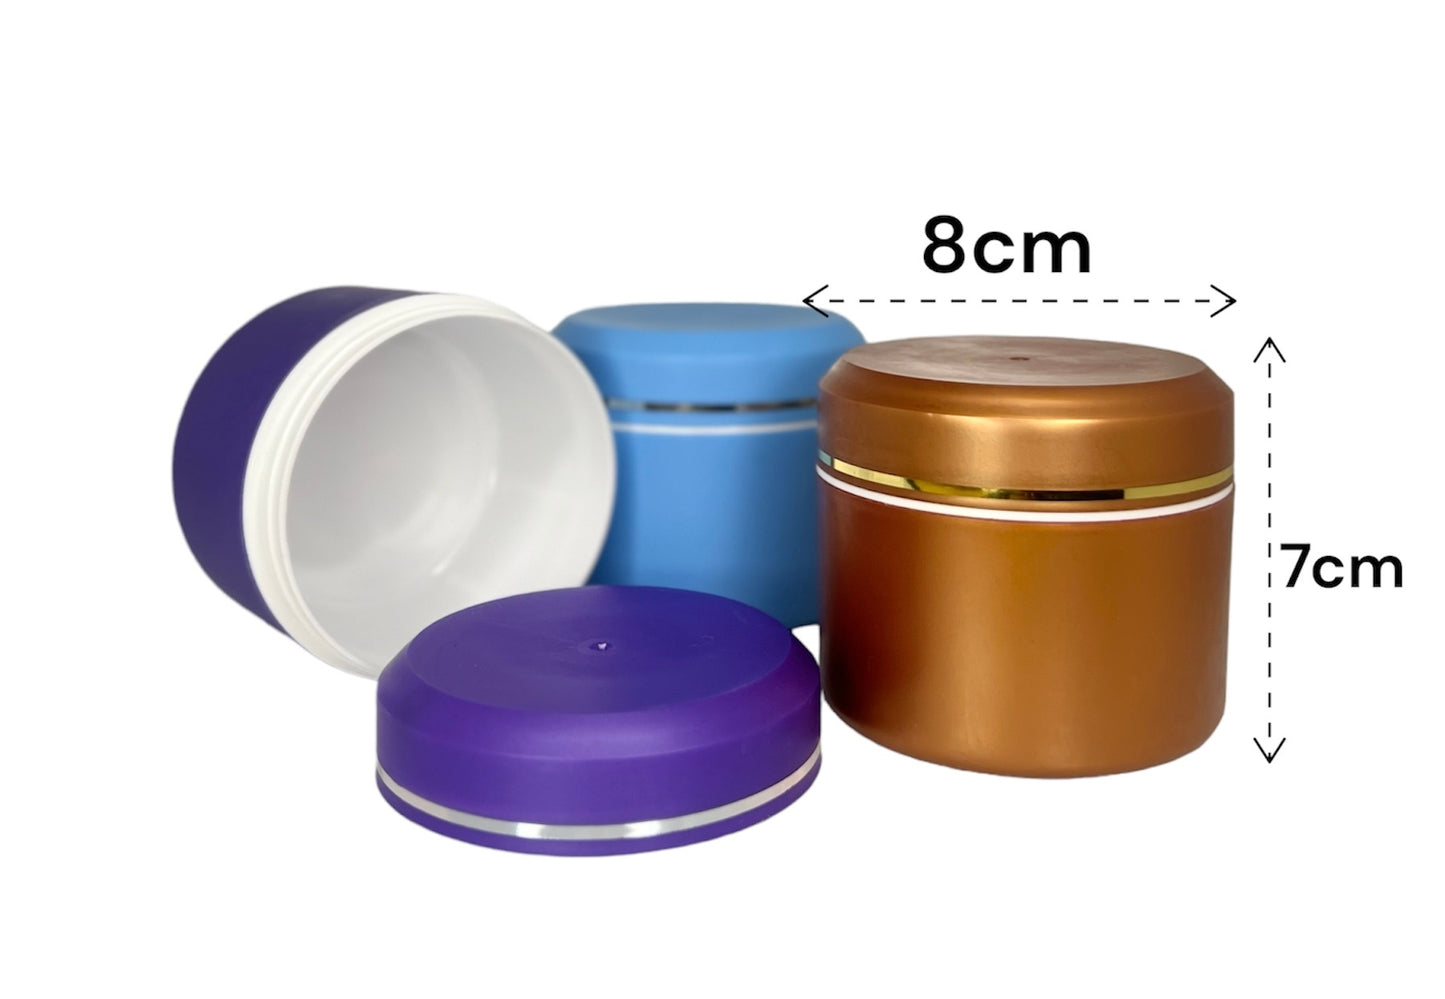 Big sizes containers